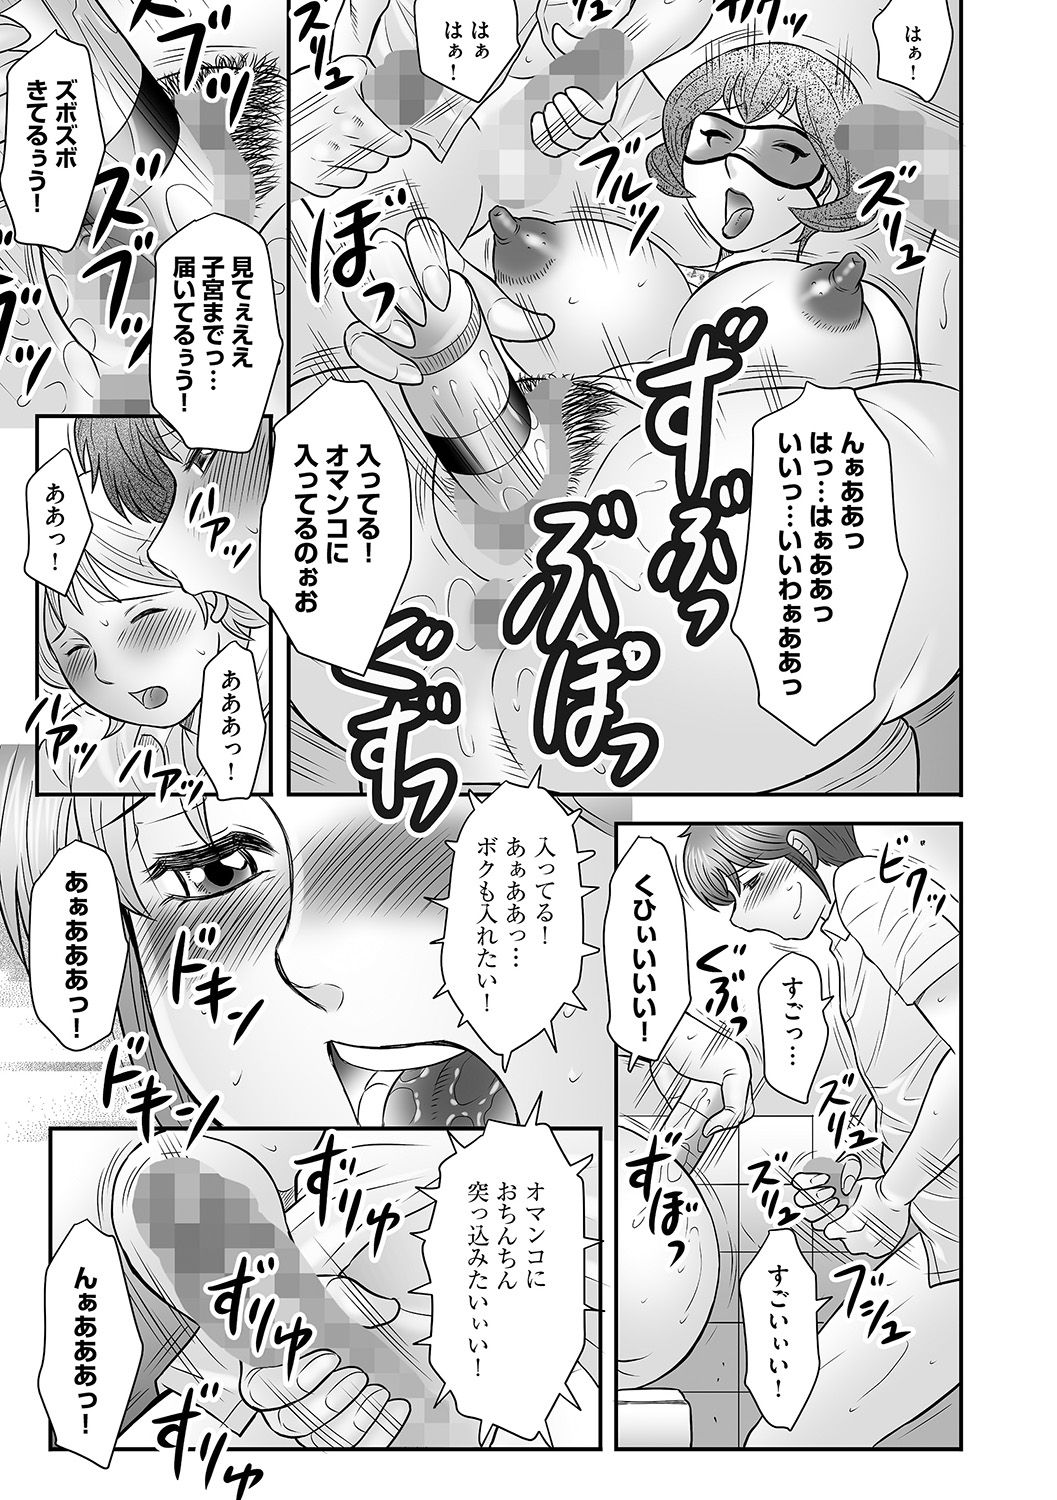 [Fuusen Club] Boshi no Susume - The advice of the mother and child Ch. 14 (Magazine Cyberia Vol. 73) [Digital] page 19 full